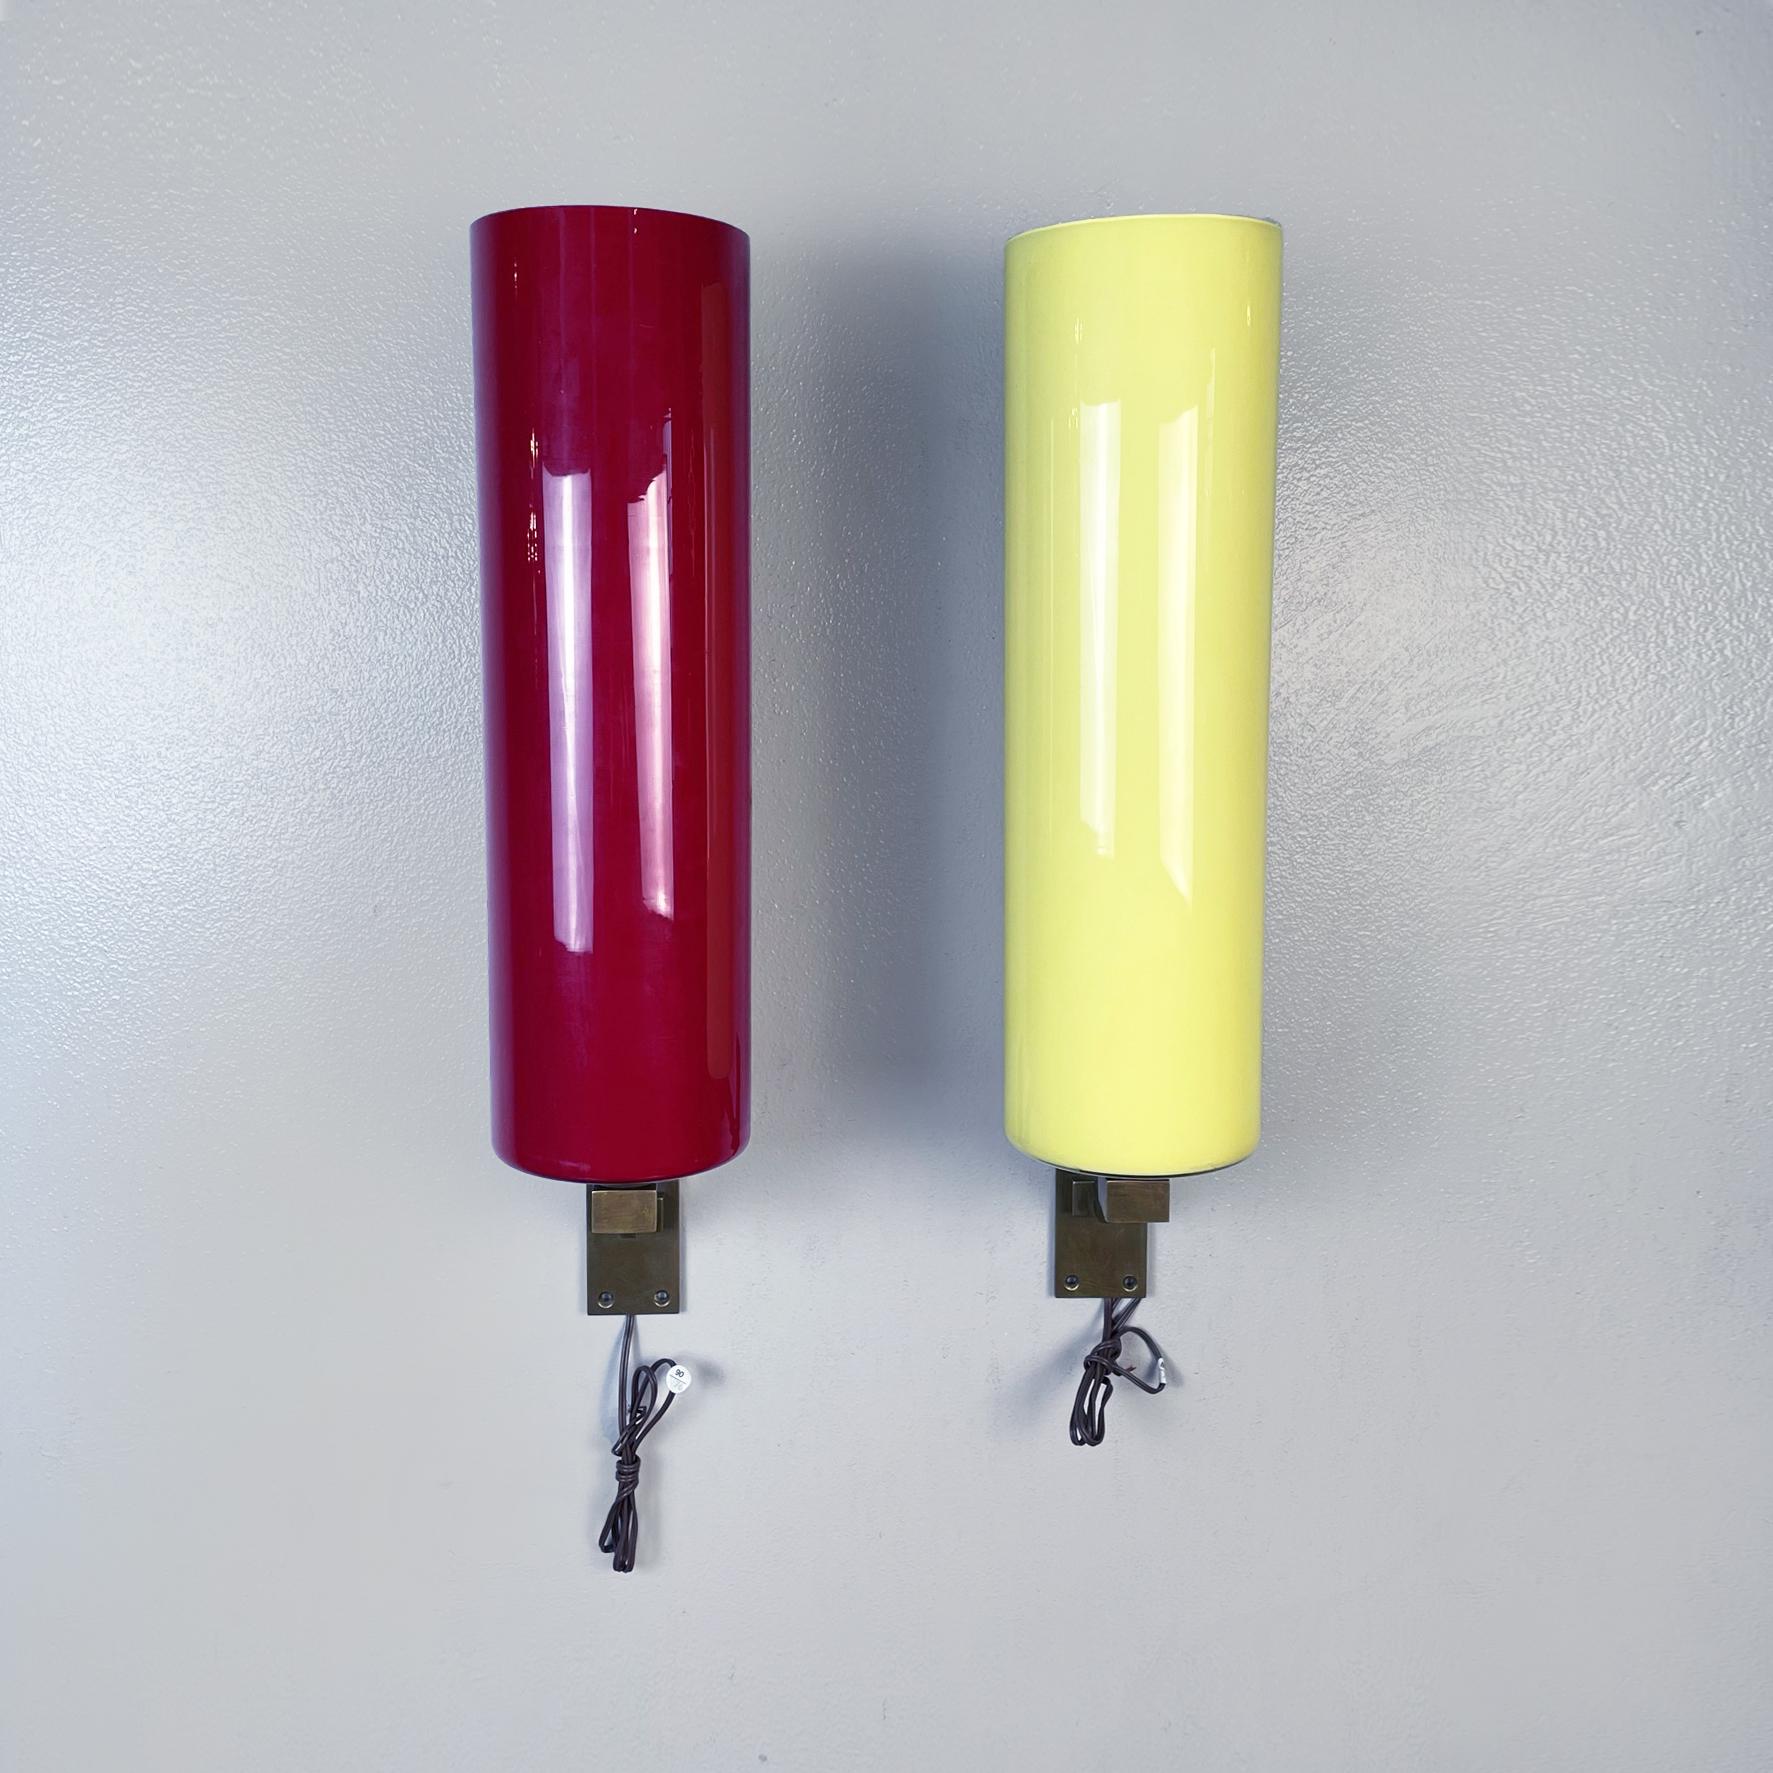 Italian mid-century glass and brass applique, attributed to Carlo Mollino, possibly made by Colli, circa 1960
Set of four colored wall lamps with brass structure and cylindrical glass lampshade. There are two lamps in red, one in yellow and one in